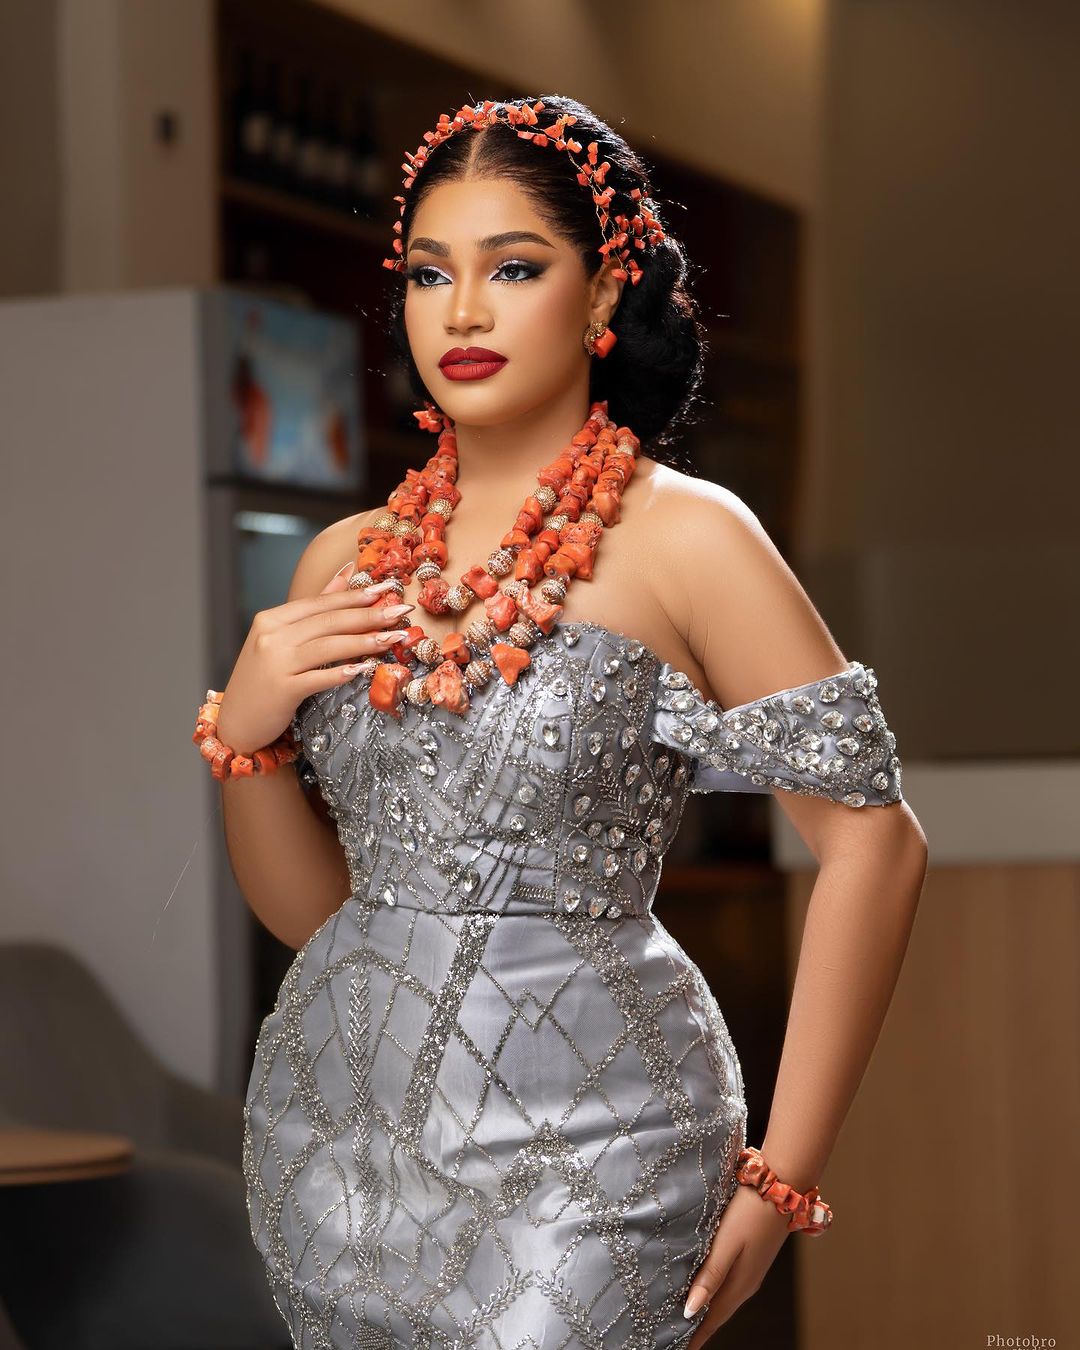 Mix Fashion and Tradition Easily With This Igbo Magnificence Look!